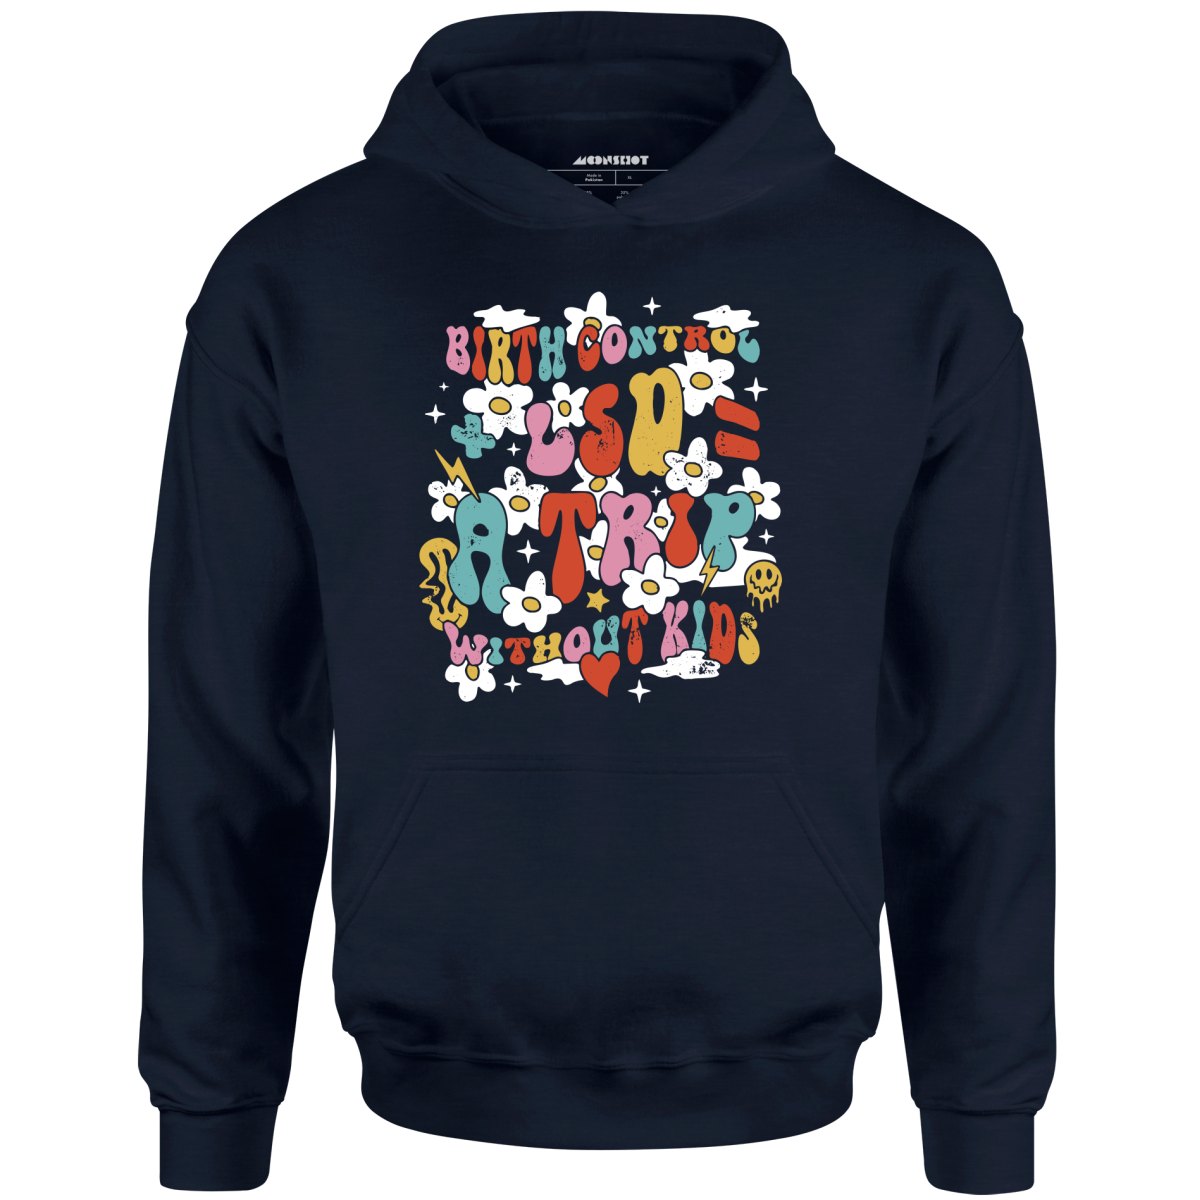 A Trip Without Kids - Unisex Hoodie